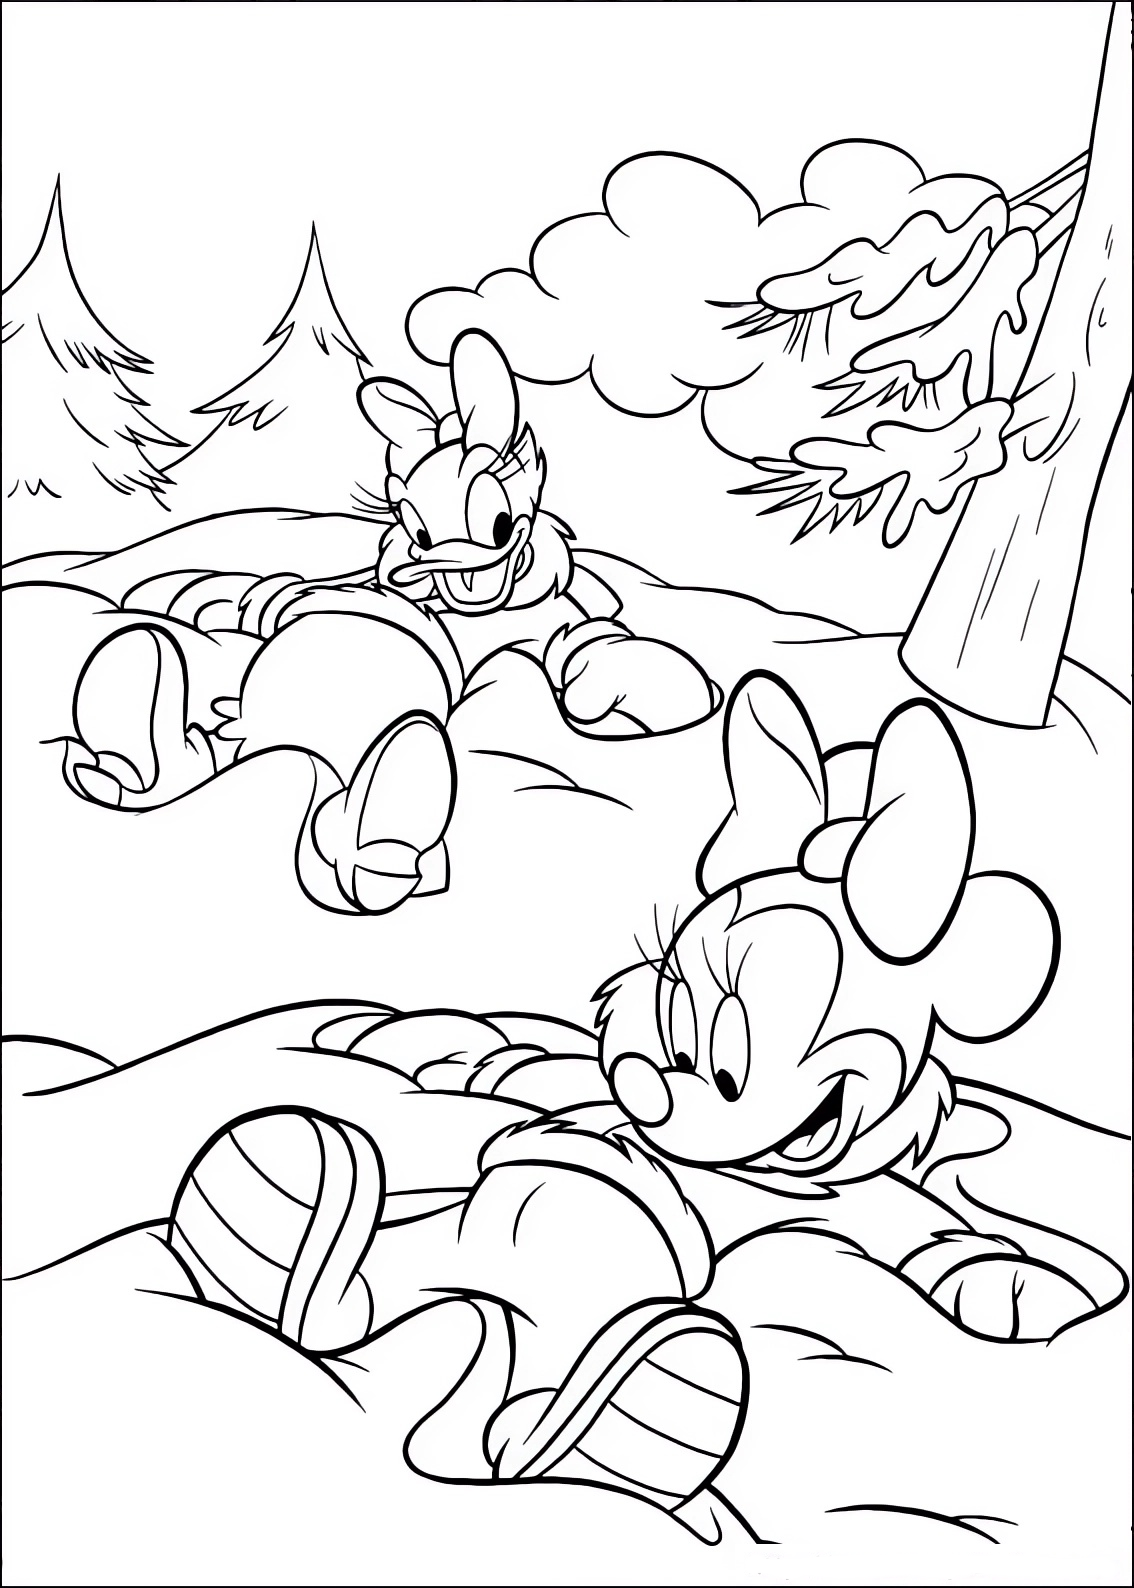 Coloring page of Minnie Mouse and Daisy Duck in the snow